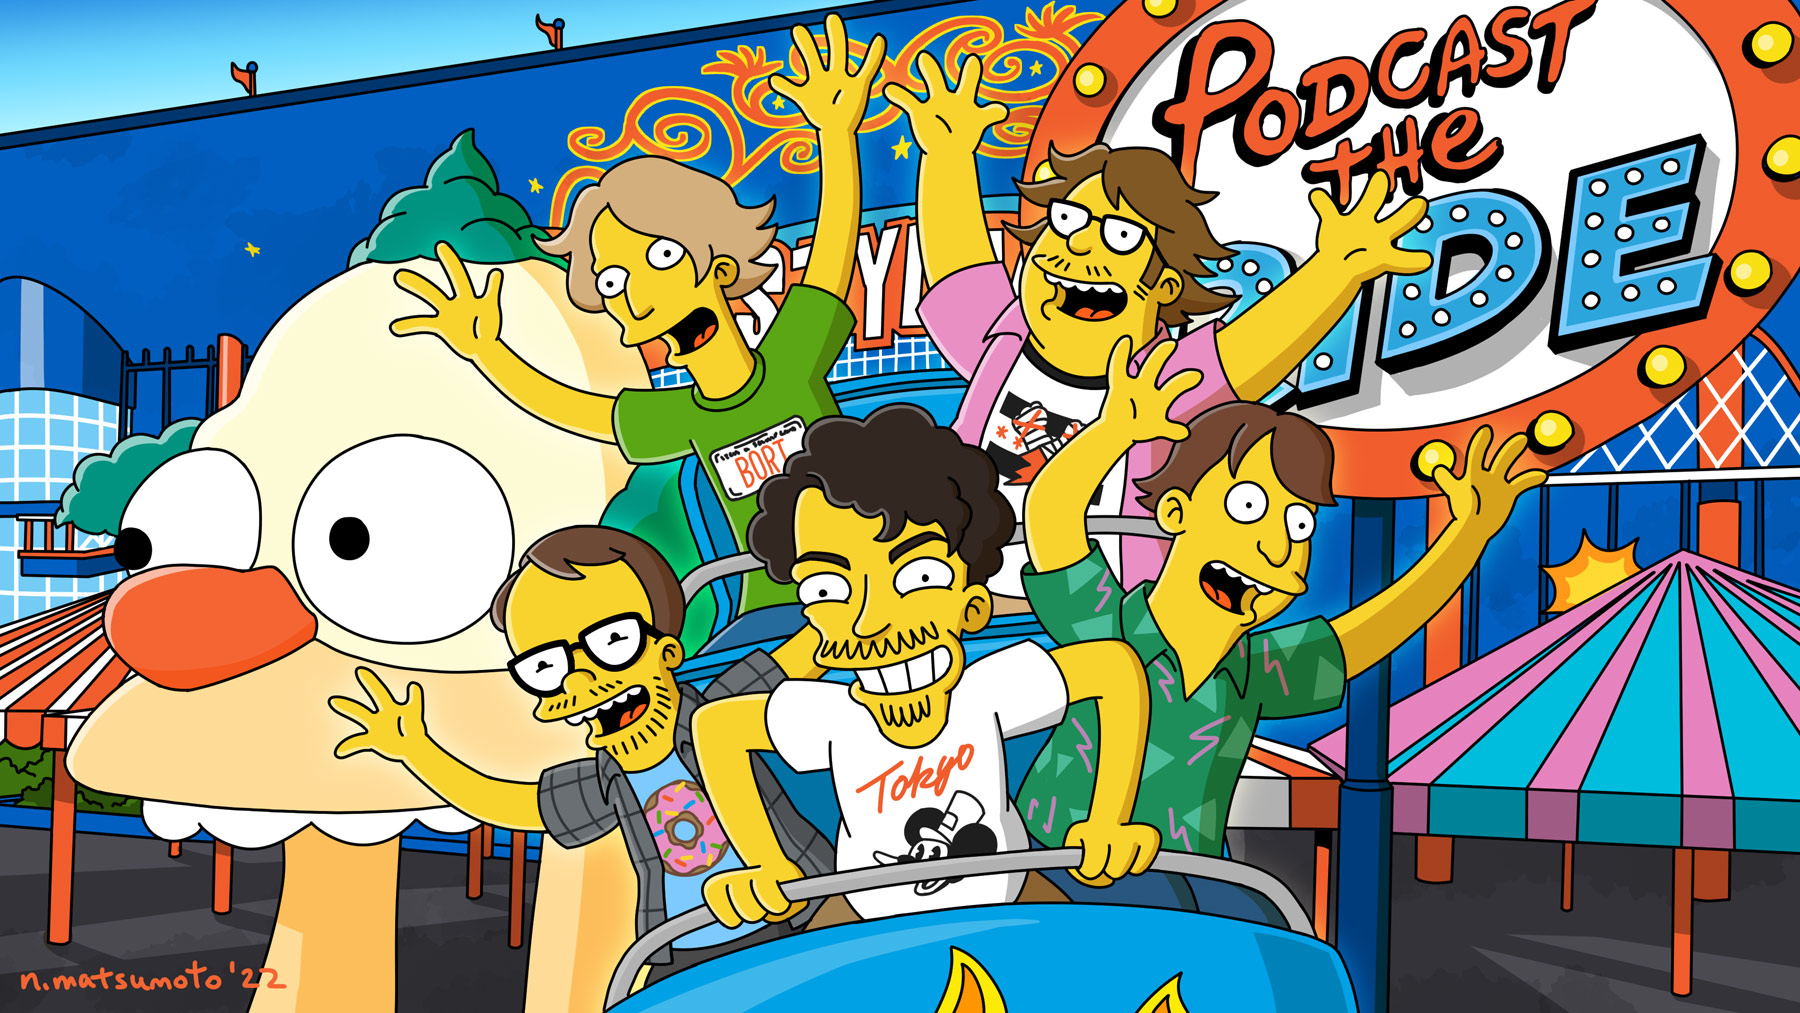 Bob, Henry, and the hosts of Podcast the Ride drawn in the Simpsons style, riding a Simpsons-themed roller coaster